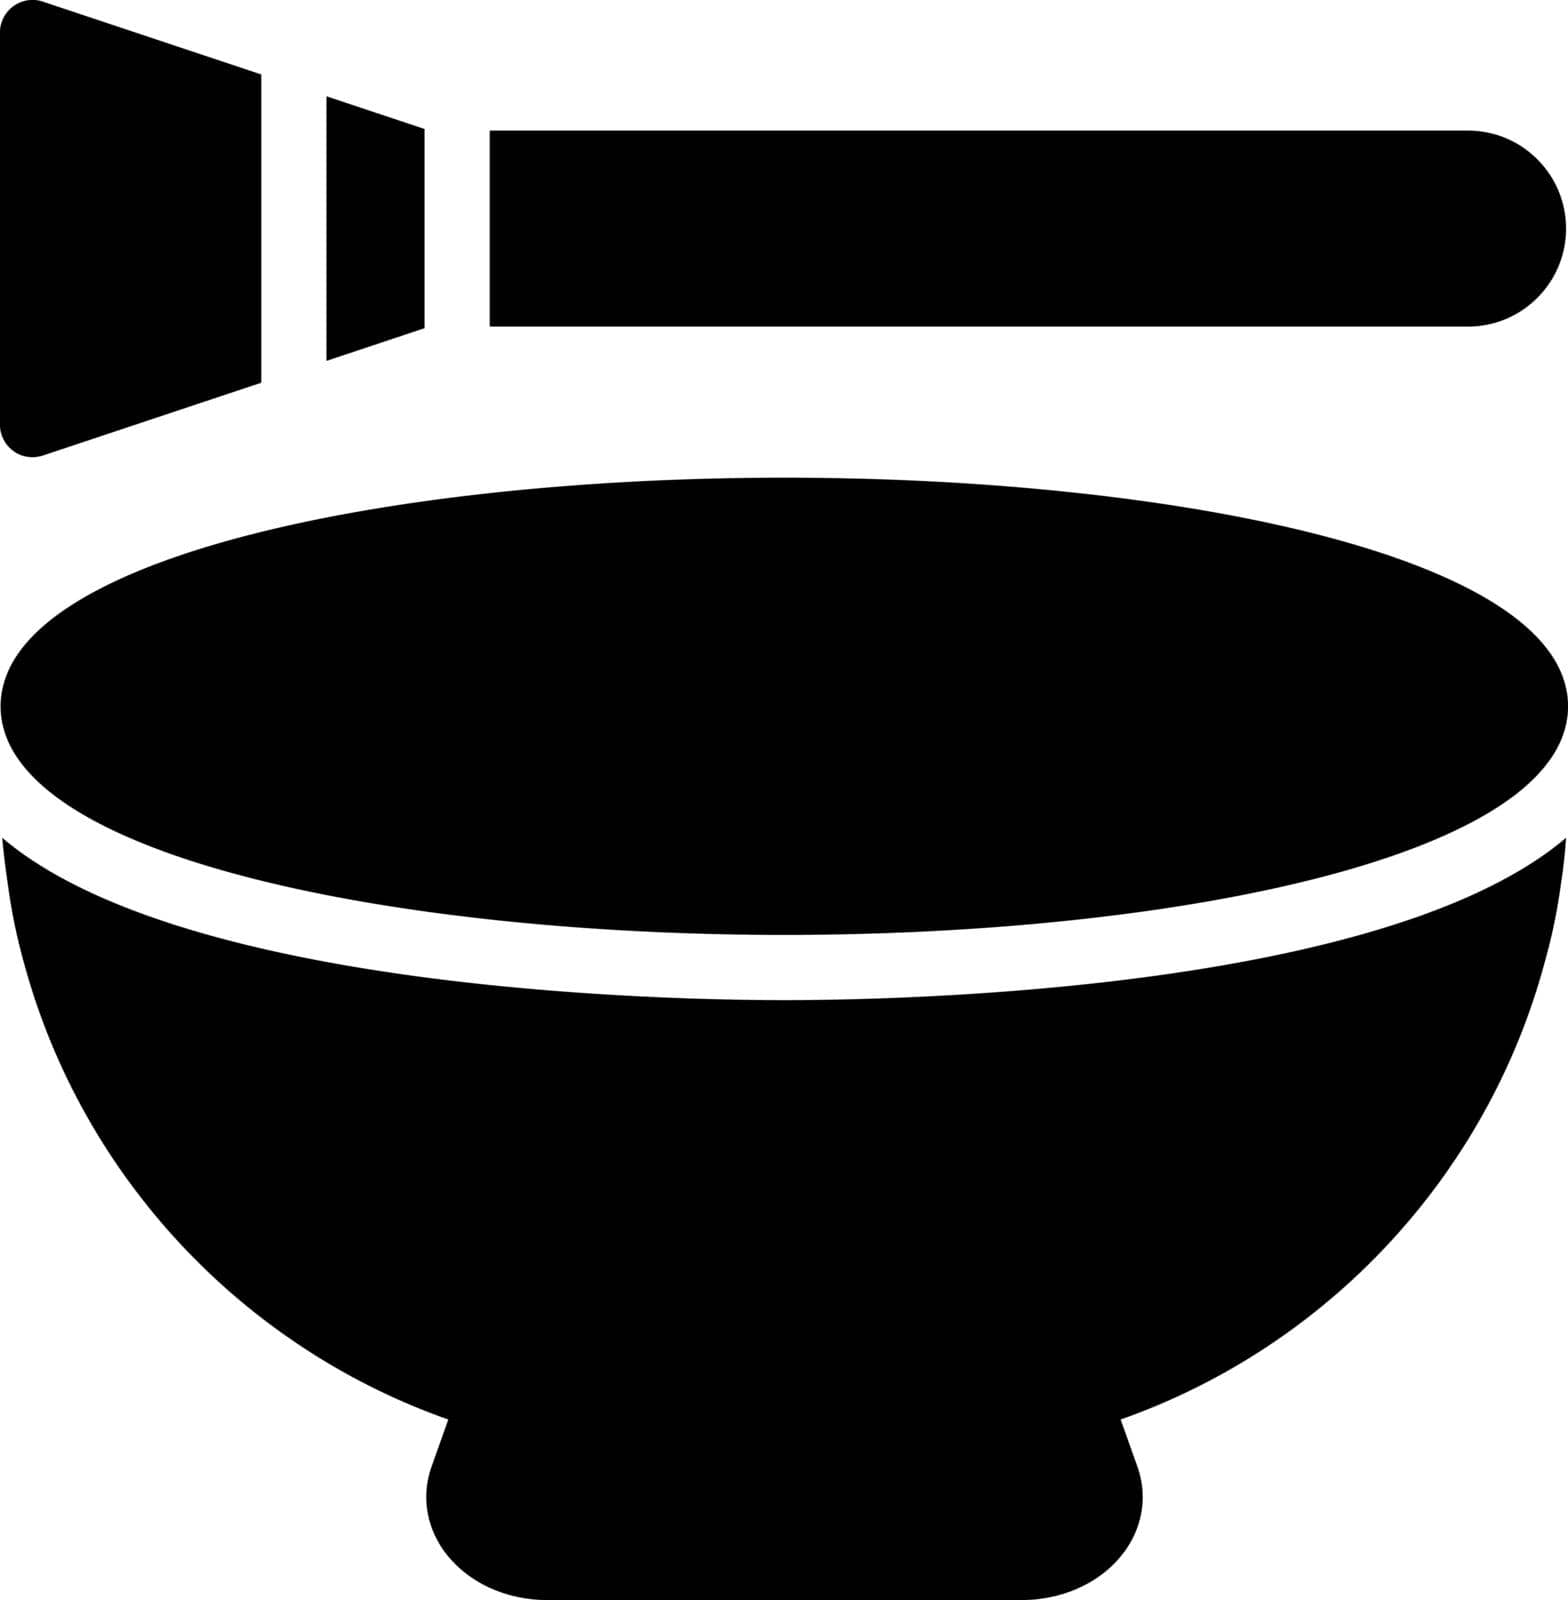 bowl vector illustration on a transparent background.Premium quality symbols.Glyph icons for concept and graphic design.